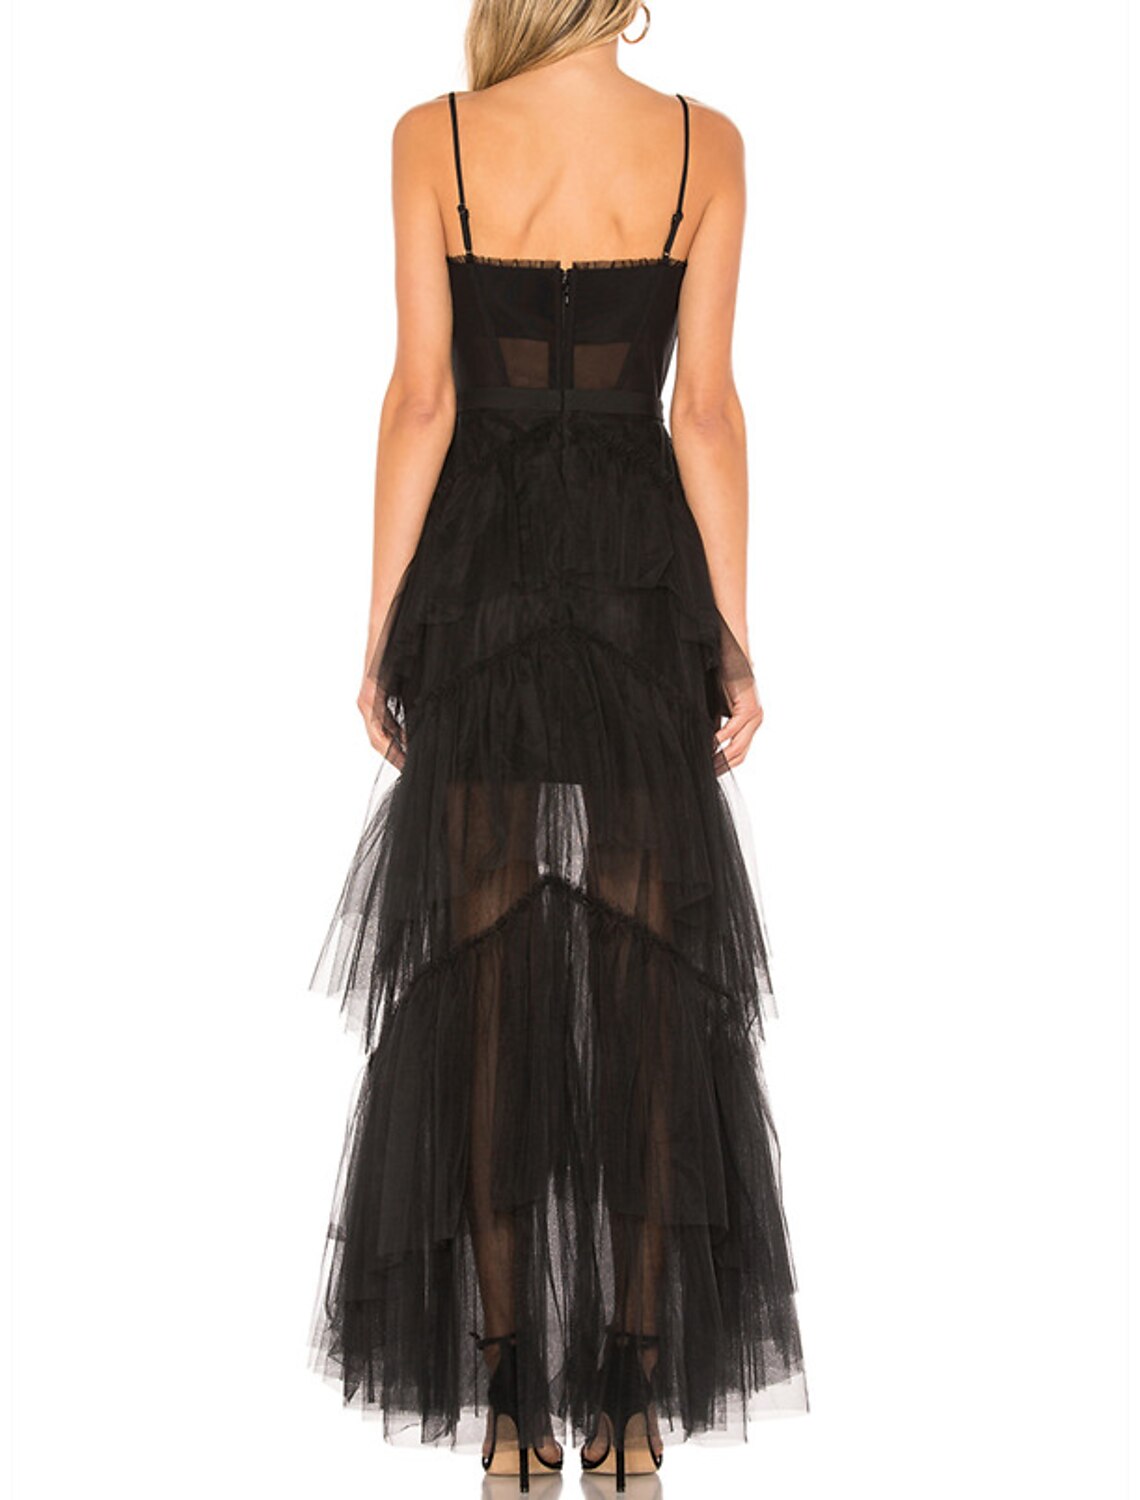 A-Line Prom Dresses Corsets Black Dress Wedding Party Floor Length Sleeveless Spaghetti Strap Tulle with Fringe